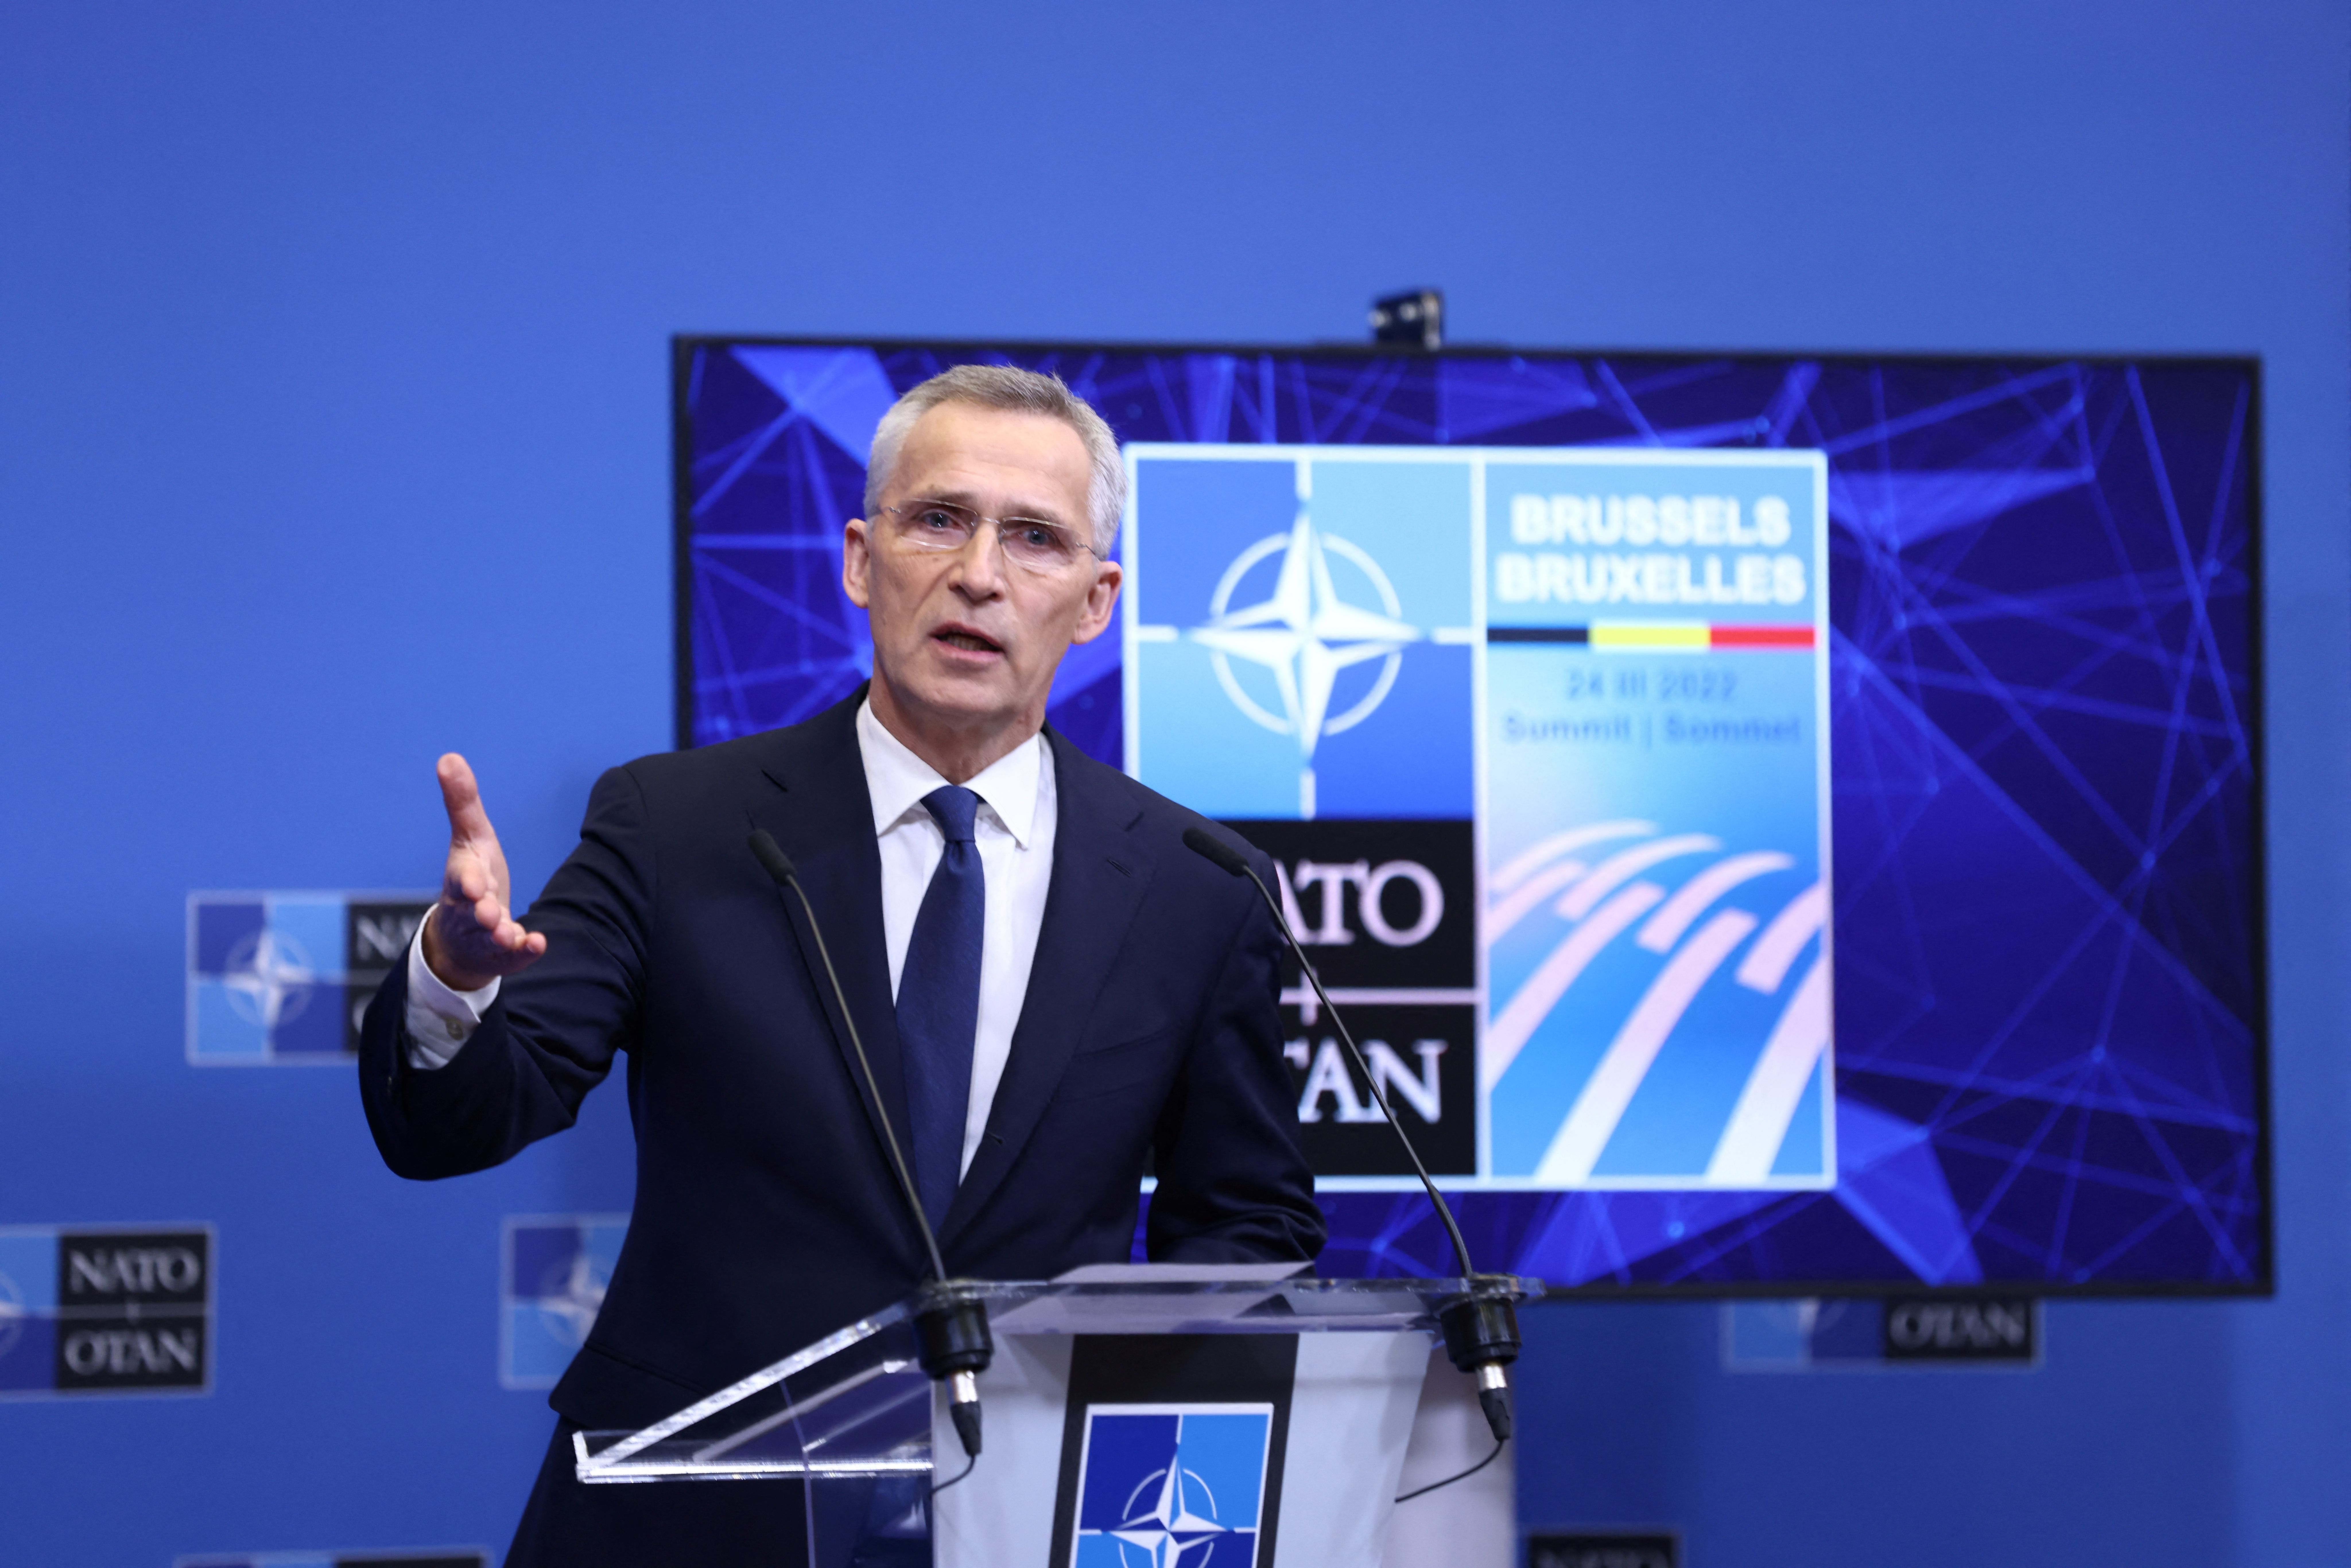 NATO Secretary General Jens Stoltenberg addresses a press conference at NATO Headquarters in Brussels on March 24.